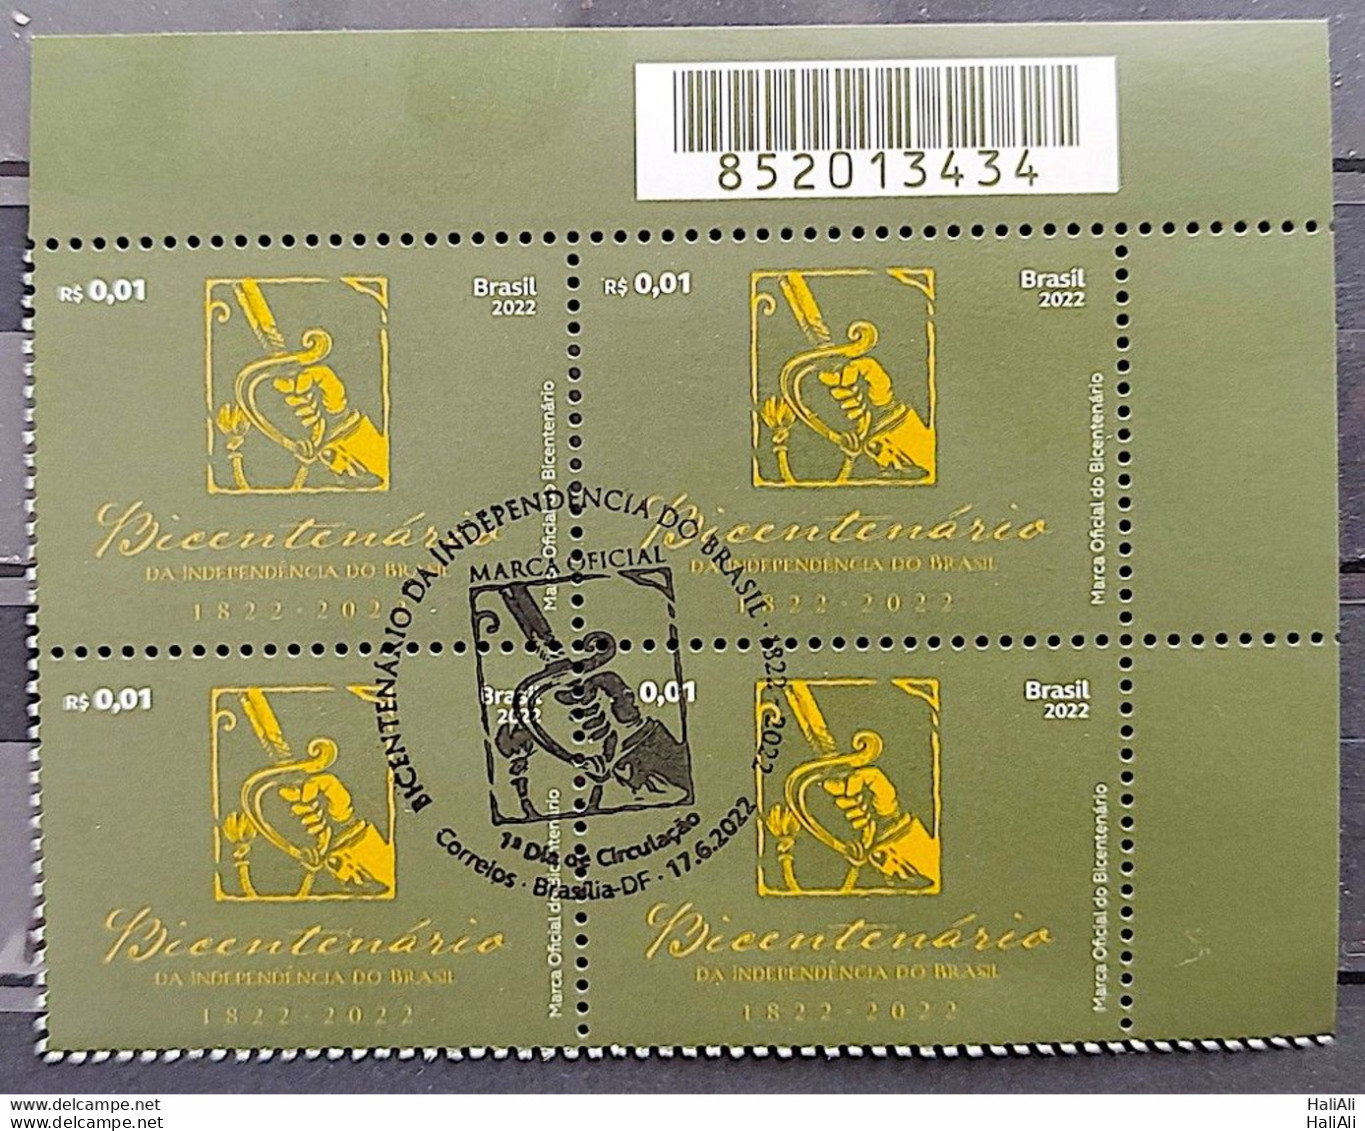 C 4055 Brazil Stamp 200 Years Of Independence Official Brand Espada 2022 Block Of 4 CBC Brasilia Barcode - Unused Stamps